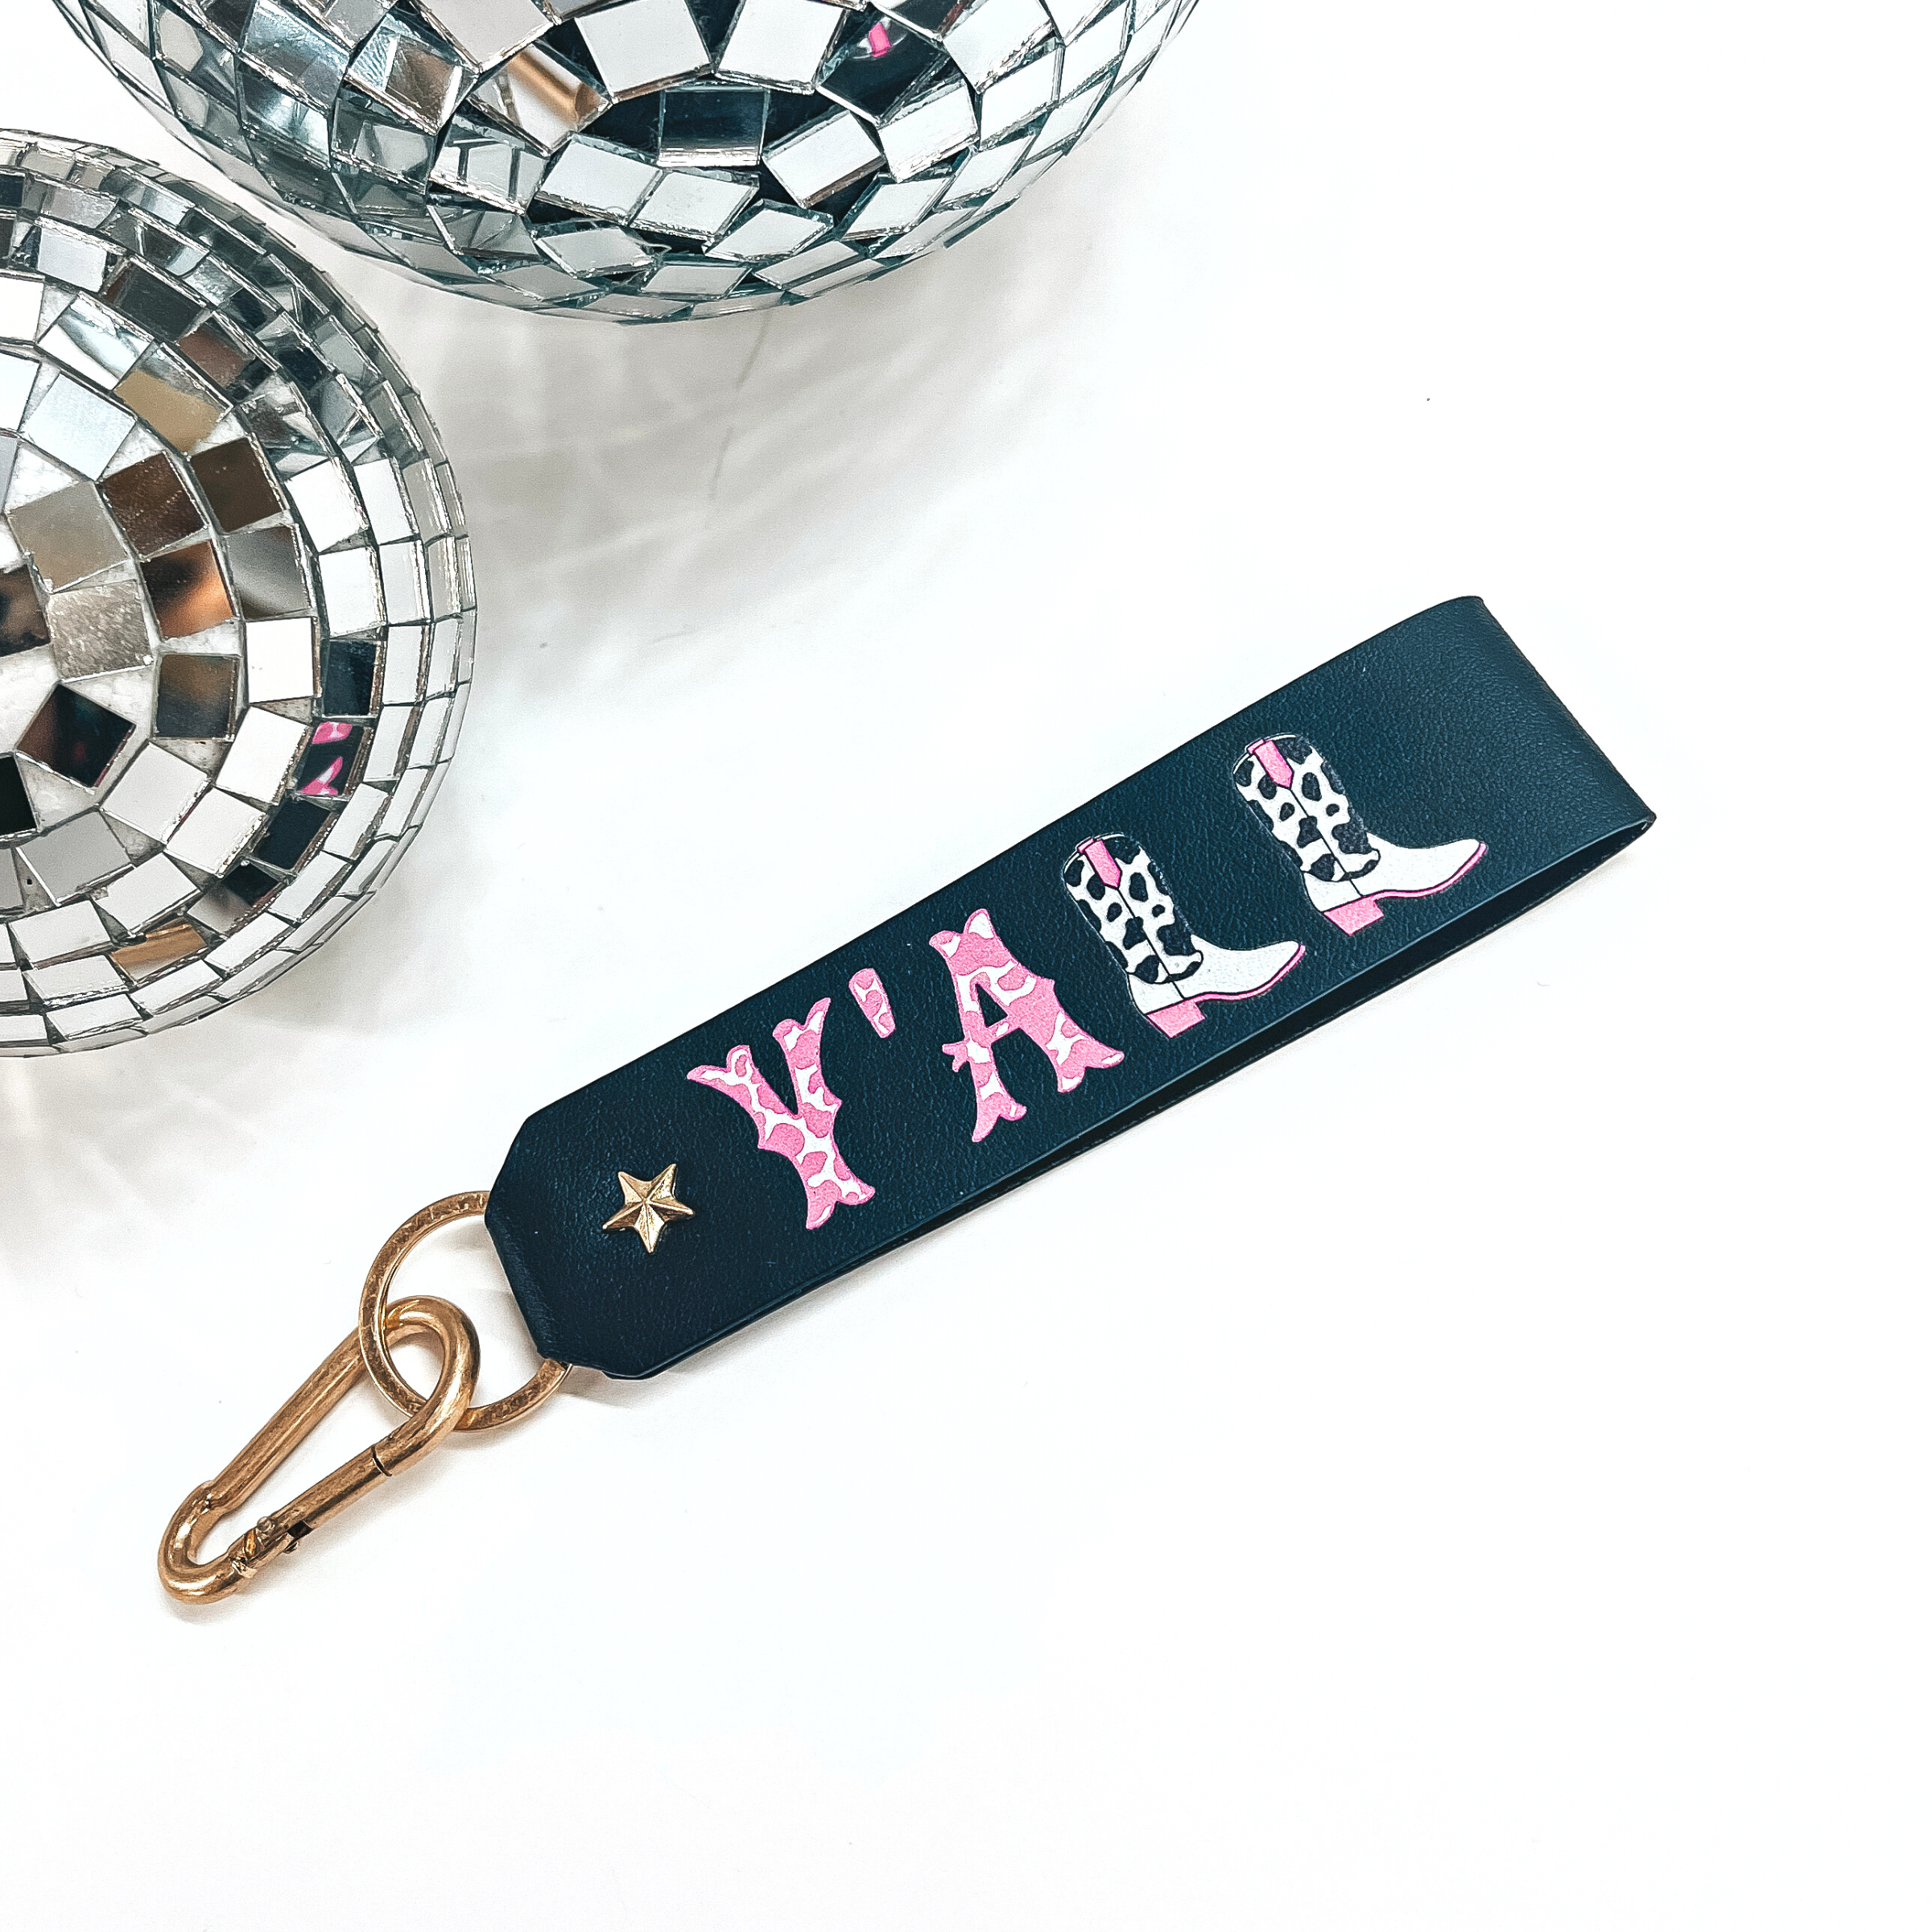 This is a black leather keychain with a matte gold key ring and a star.  It says, 'Y'ALL', with pink and white cow print inside the letters, there is  also two boots as L's. The boots have black and white cow print with pink  detailing. This keychain is taken on a white background with two disco balls  in the back as decor.